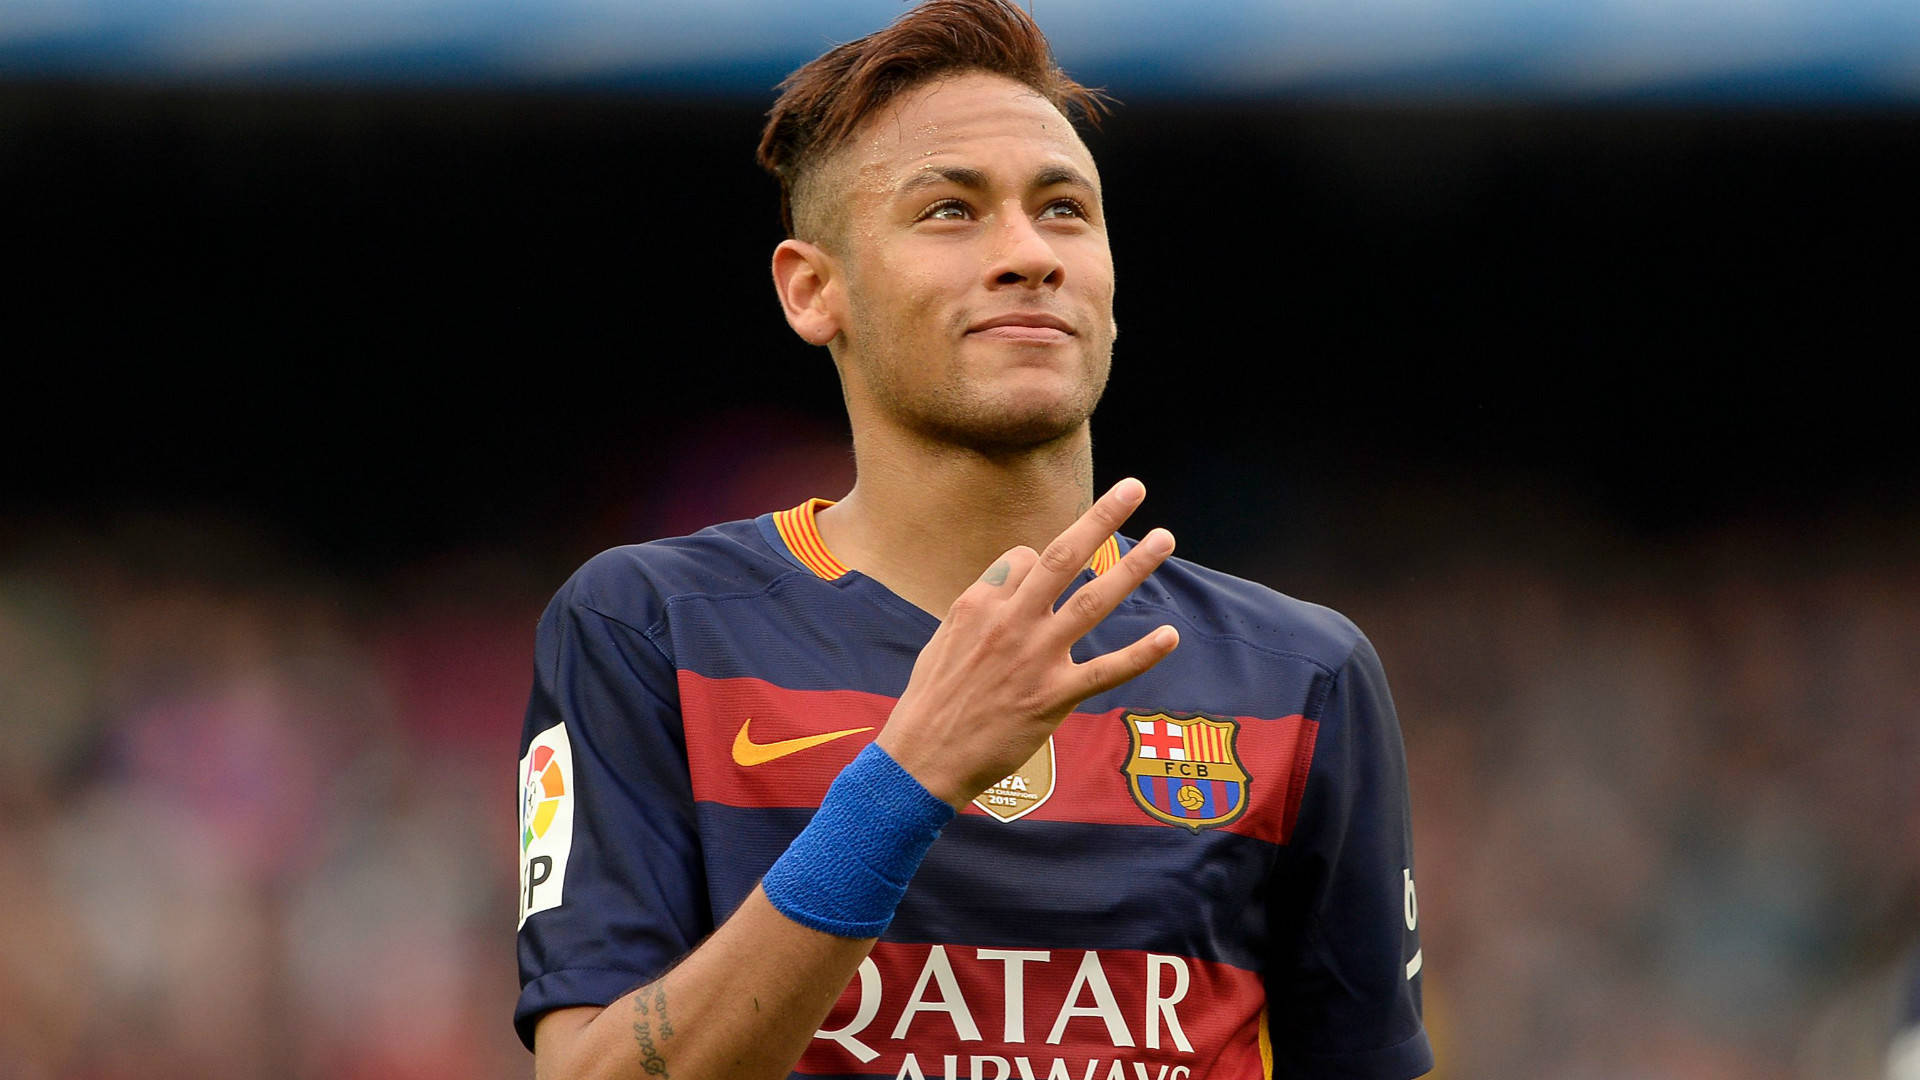 Neymar 1920X1080 Wallpaper and Background Image